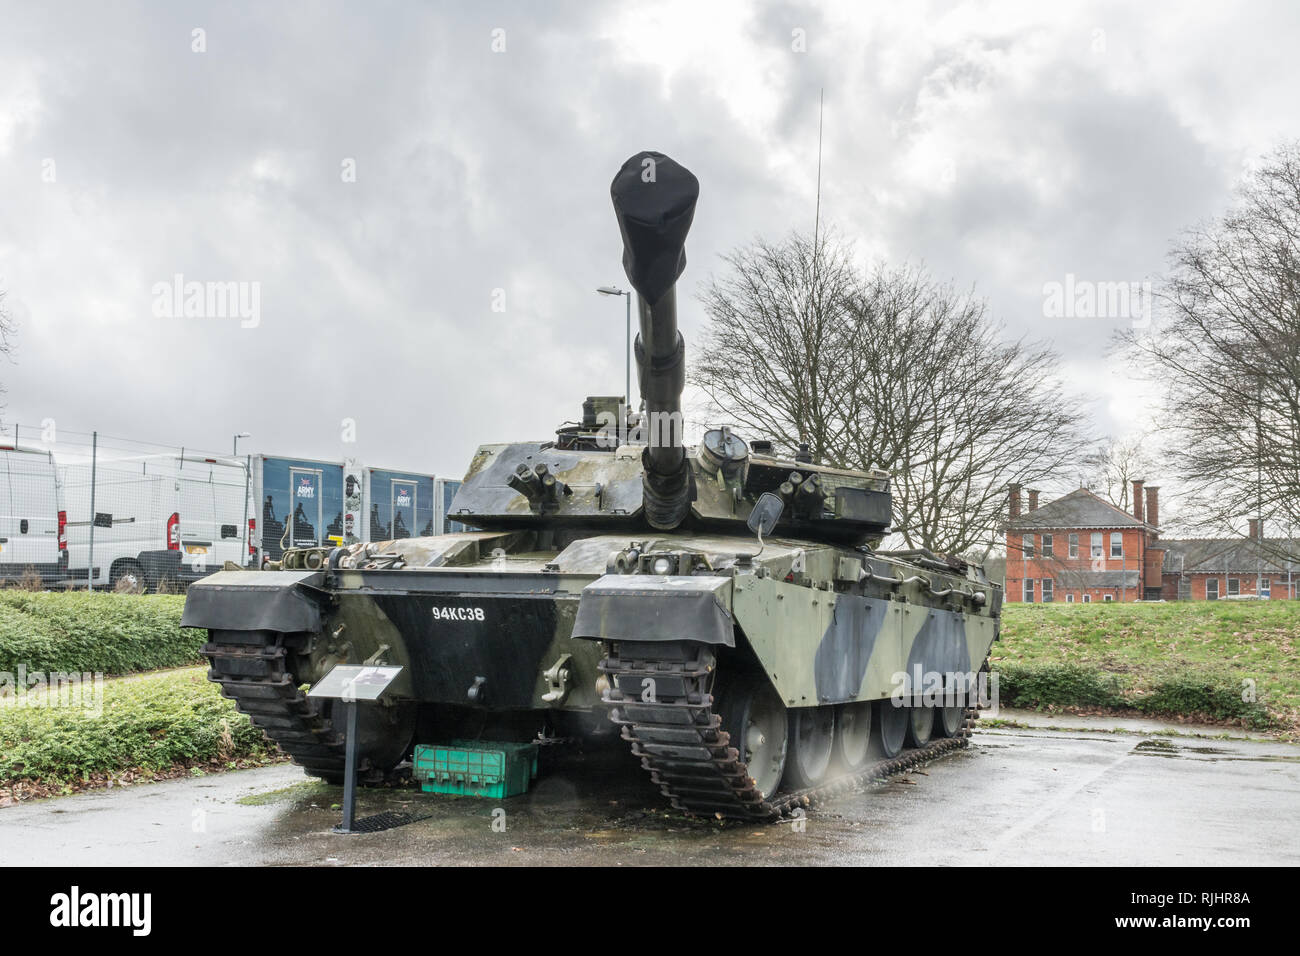 Army tank outside Aldershot Military Museum in Hampshire, UK. Challenger 1 main battle tank (MBT), 1981 Stock Photo